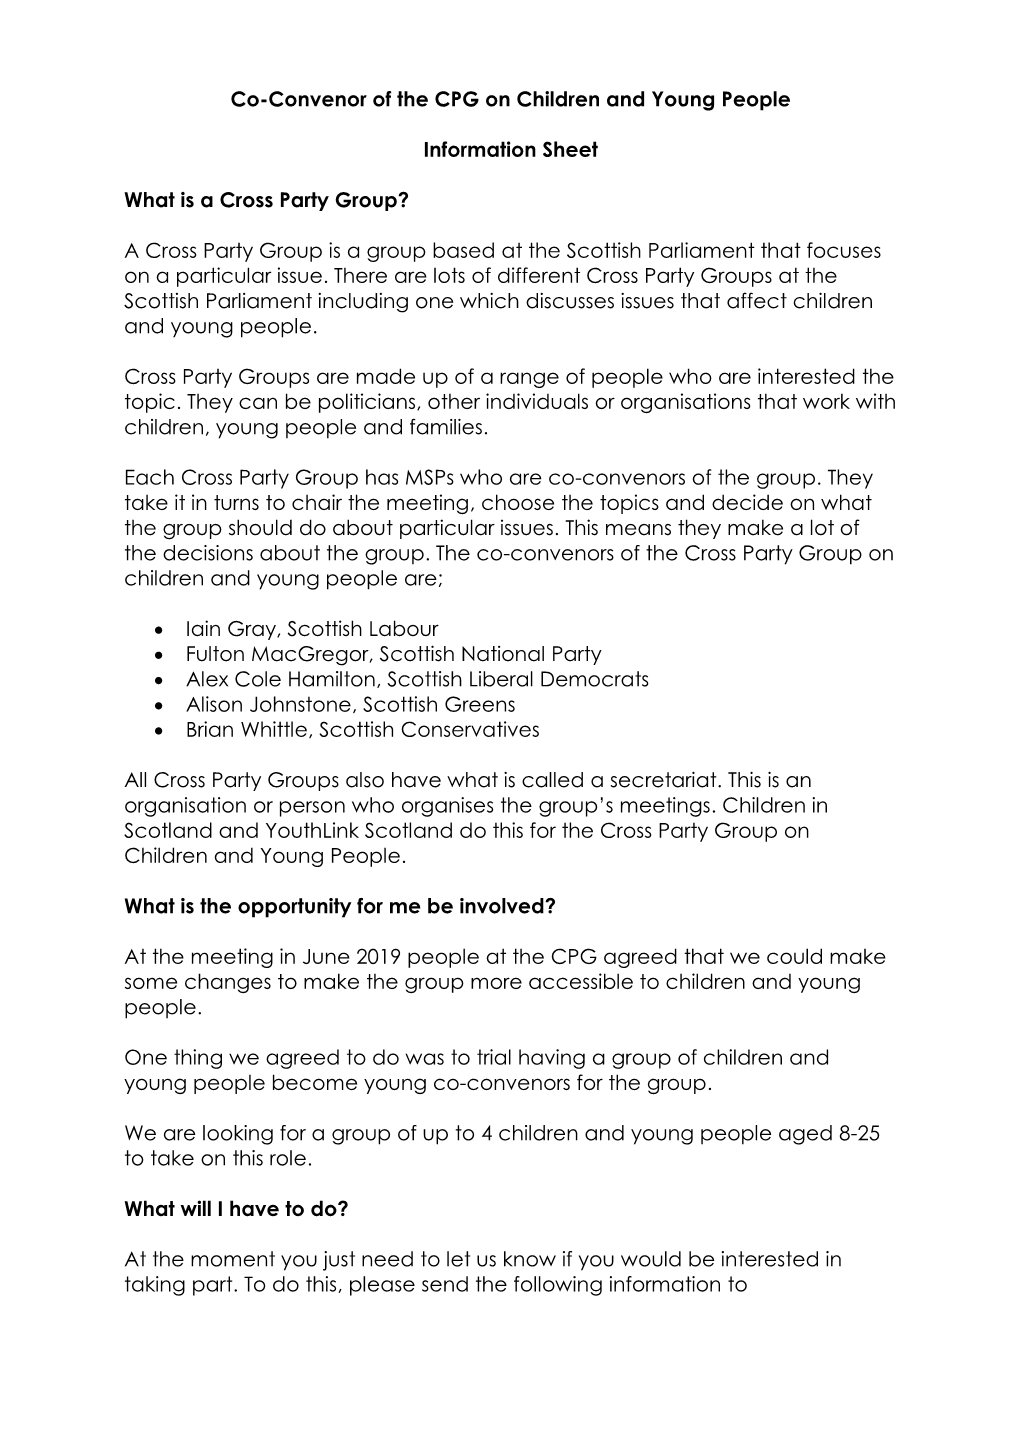 Co-Convenor of the CPG on Children and Young People Information